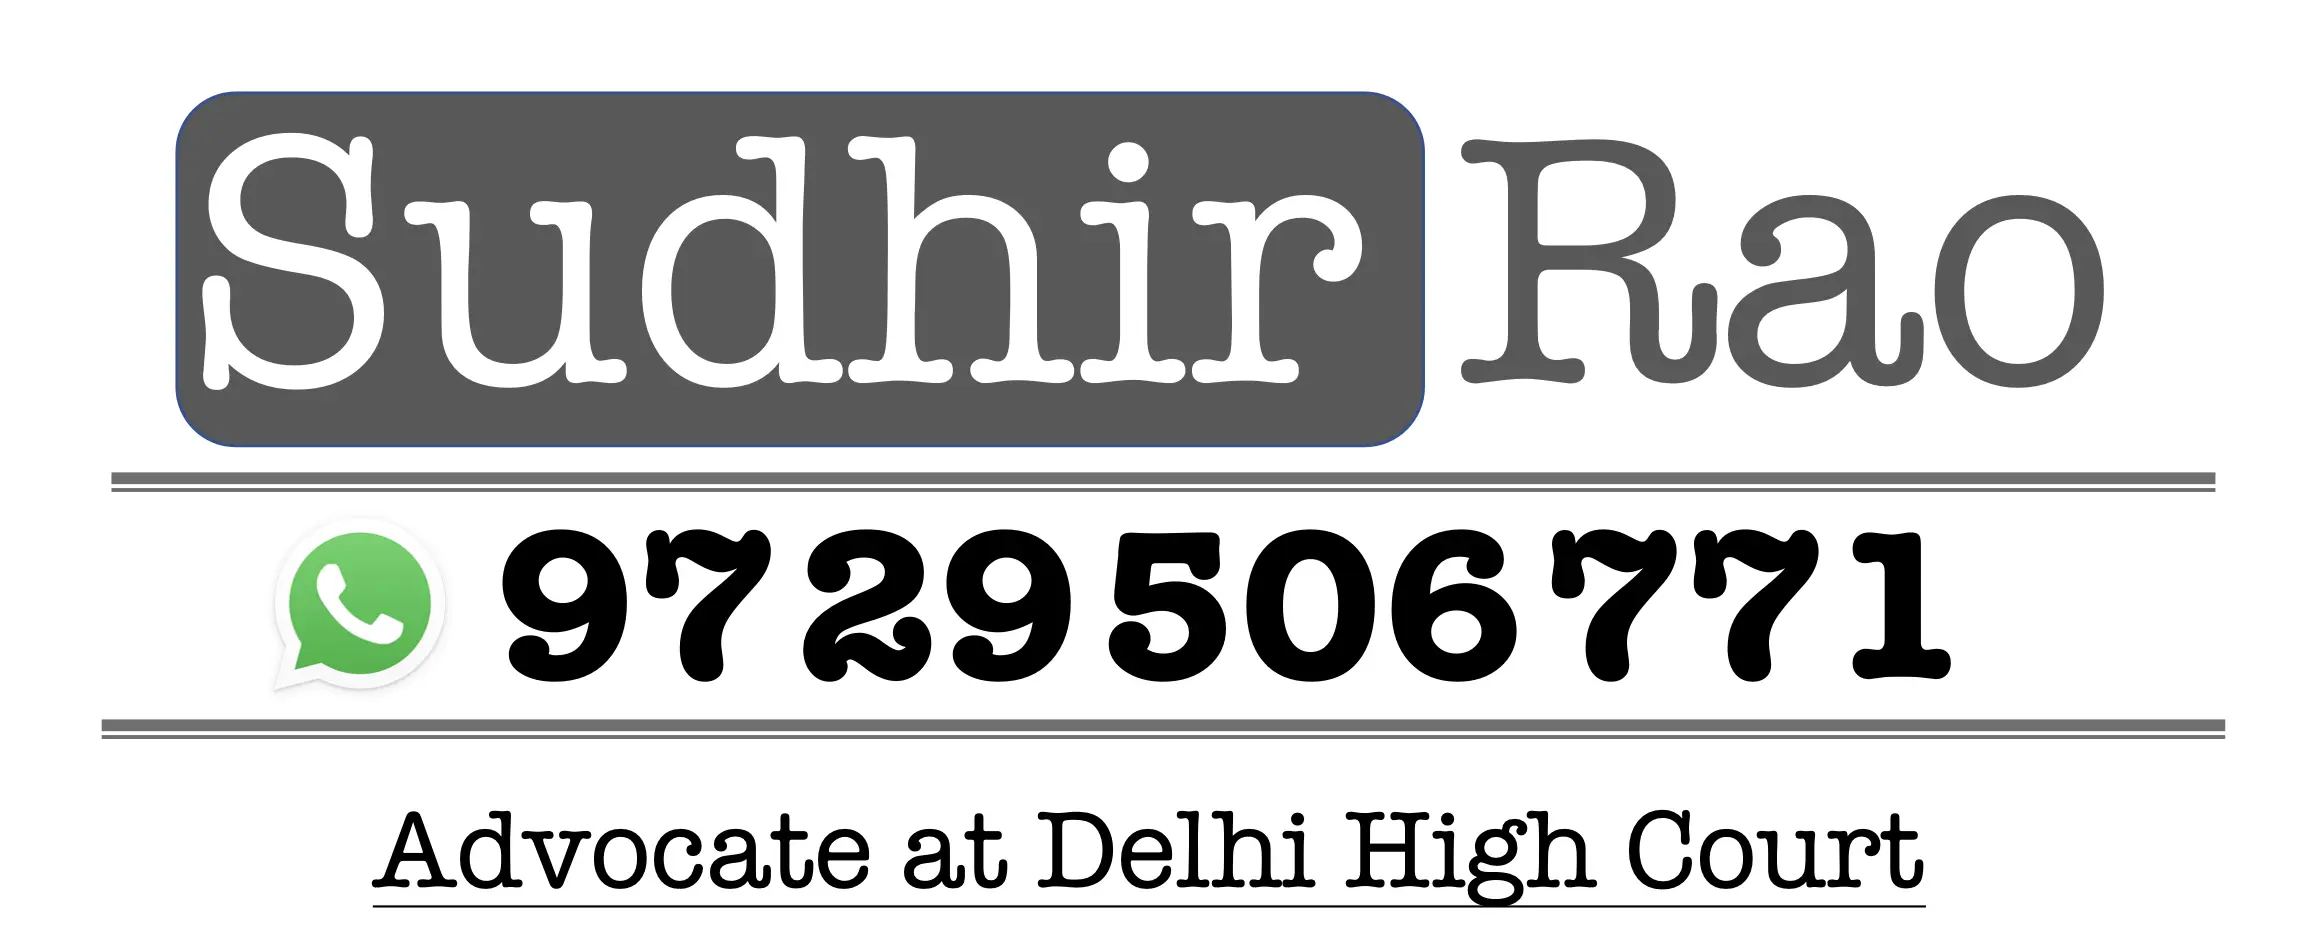 Delhi High Court Advocate Contact Number